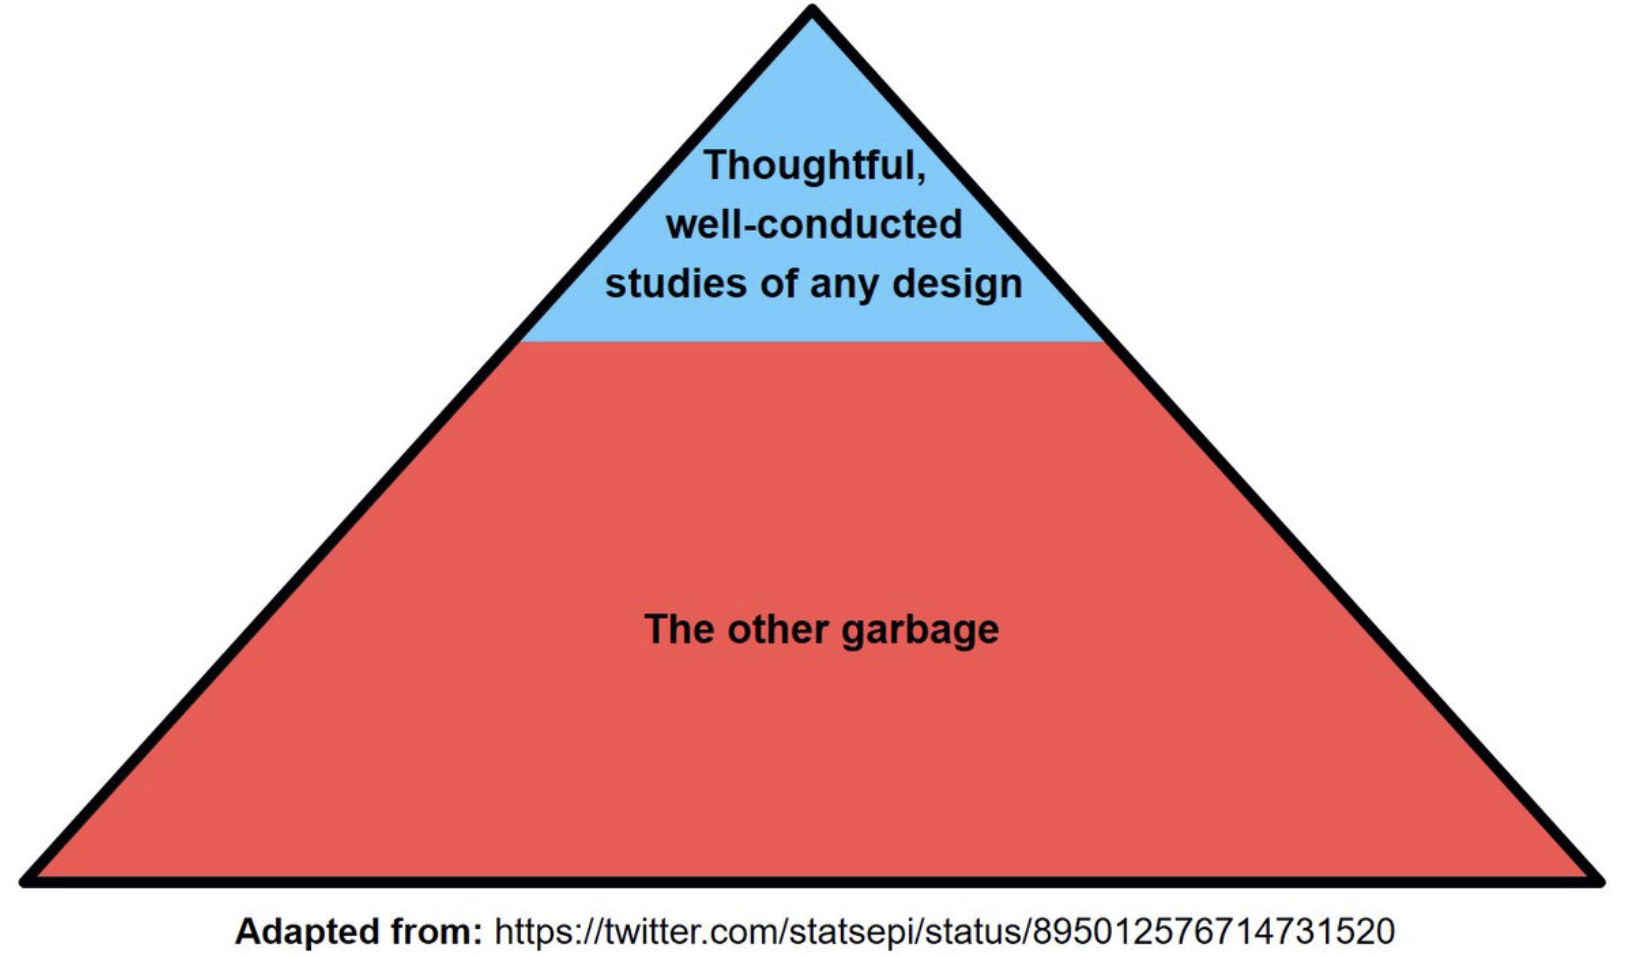 Better EBM pyramid of research designs